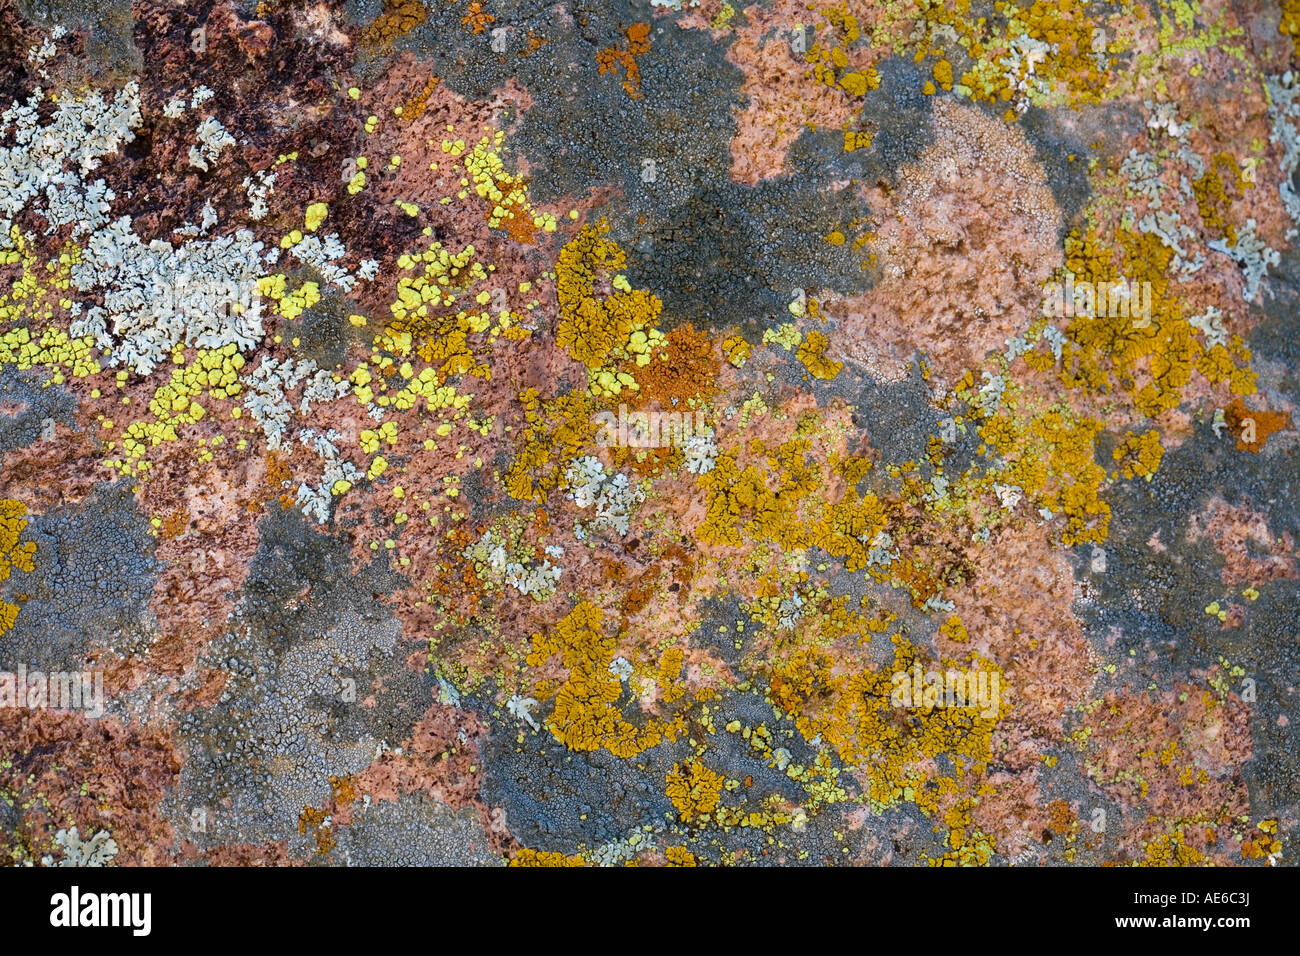 Mixed Lichens cover the side of a boulder in the Sonoran Desert near Tucson Arizona Stock Photo